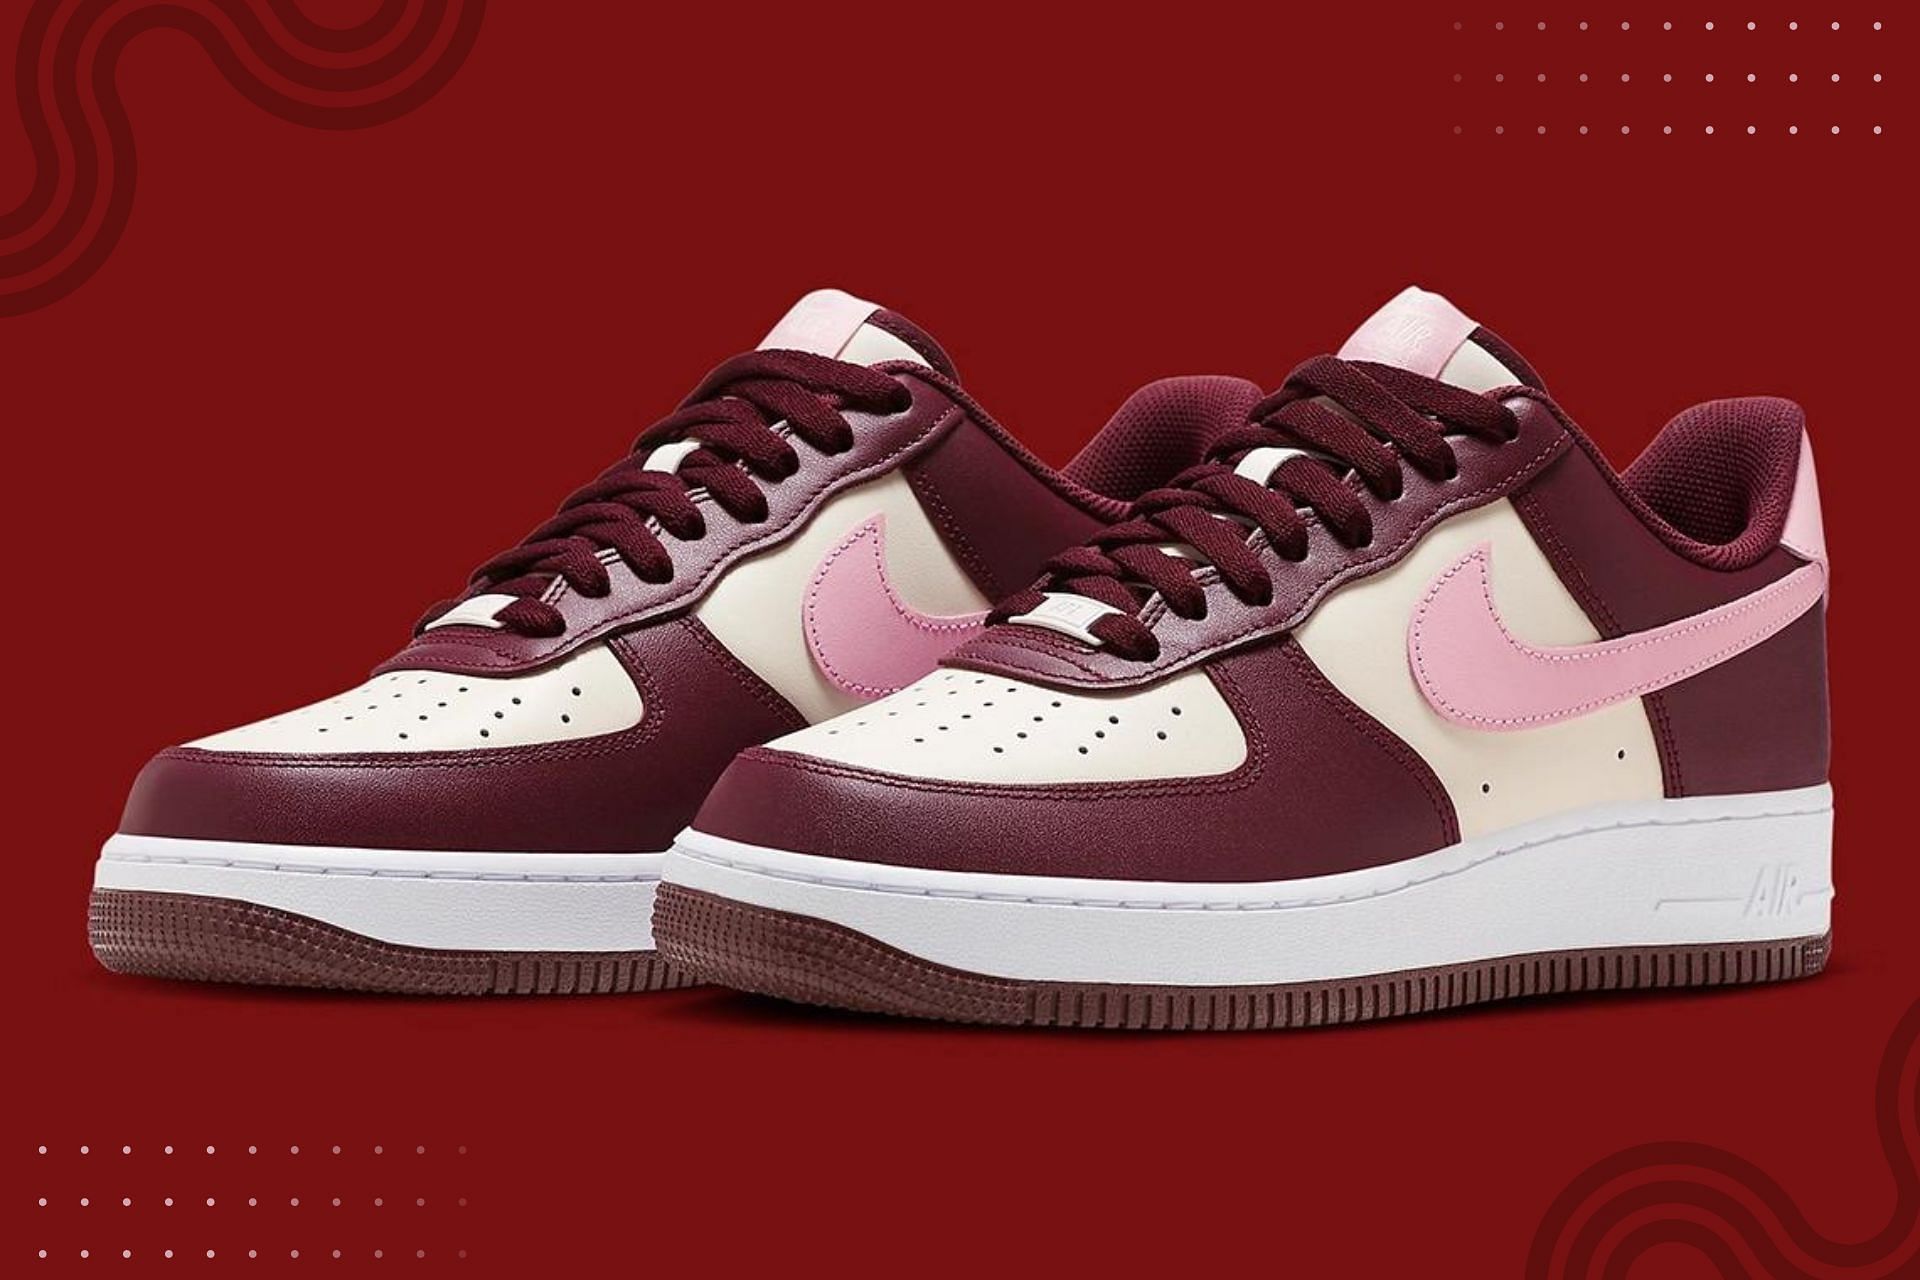 Air force 1 low valentine s day. Nike Air Force 1 Low “Valentine’s Day” 2023. Nike Air Force Valentines Day 2023. Nike Air Force 1 Low Valentine s Day 2023. Nike Air Force 1 Valentine's Day 2023.